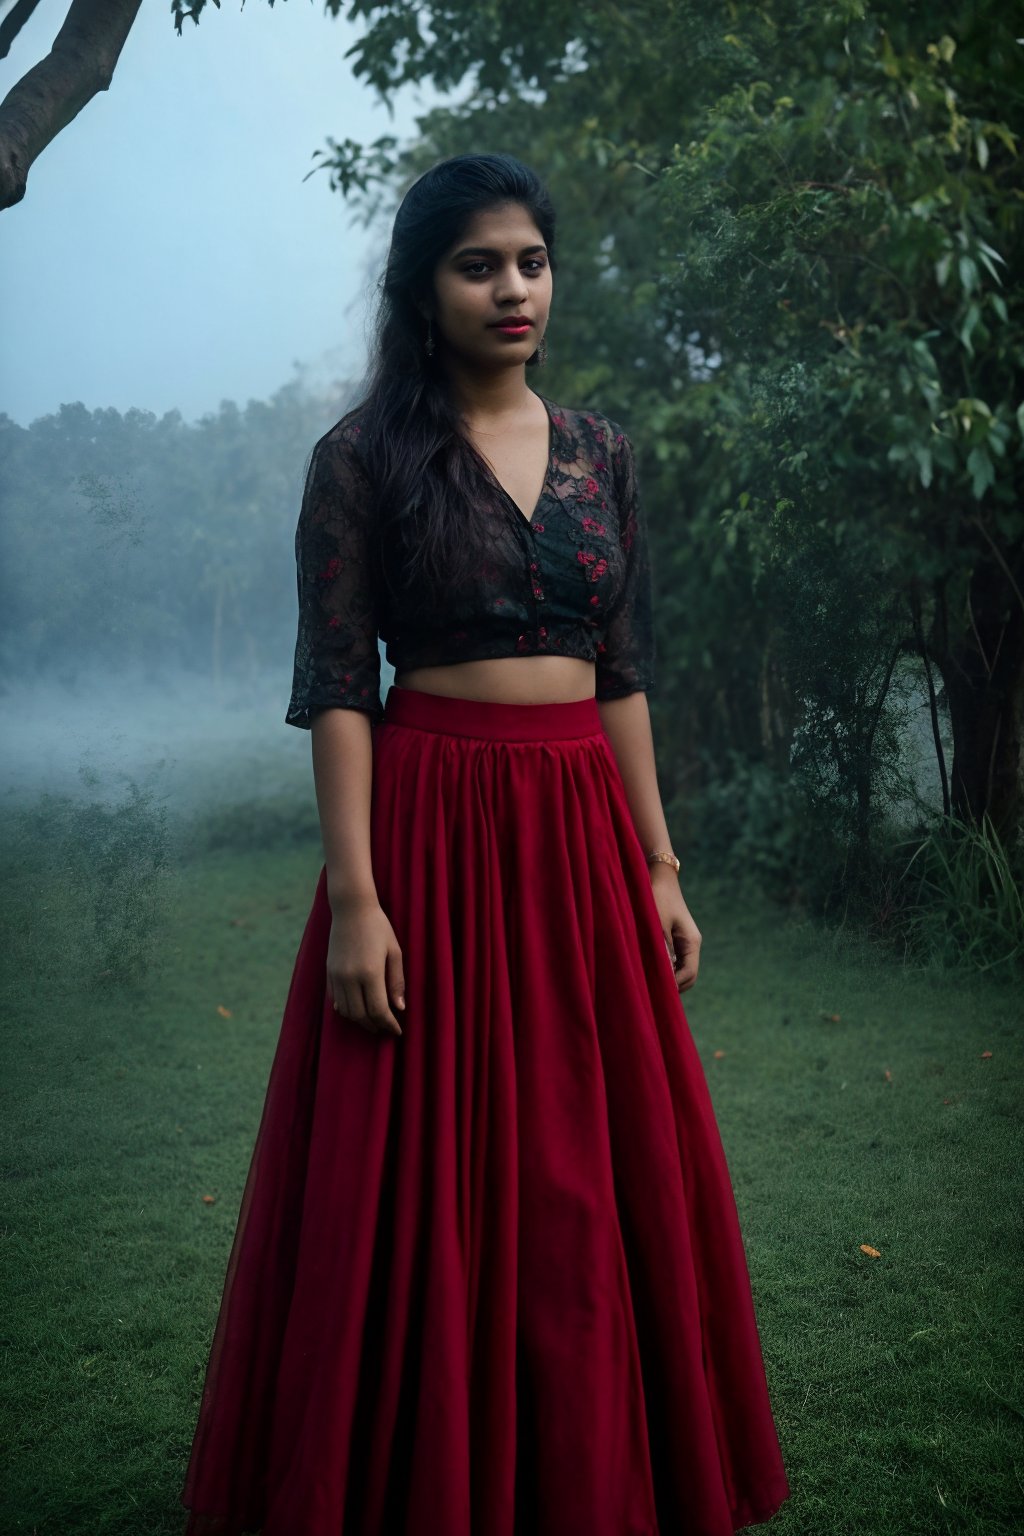 In dark night, In this stunning 8K photo, long skirt, gown, long designer blouse, a serene foggy garden sets the stage for a mesmerizing portrait of a 20-year-old Indian women. Beautiful face, attractive Big eye, Her flawless complexion glows softly under the misty atmosphere's subtle lighting, highlighting her striking features: large eyes and proper breasts. The lush green grass and vibrant red roses surrounding her create a picturesque backdrop, accentuating her natural beauty. Red, ultra realistic photography, She poses elegantly in a gorgeous long-pavada skirt in soft,